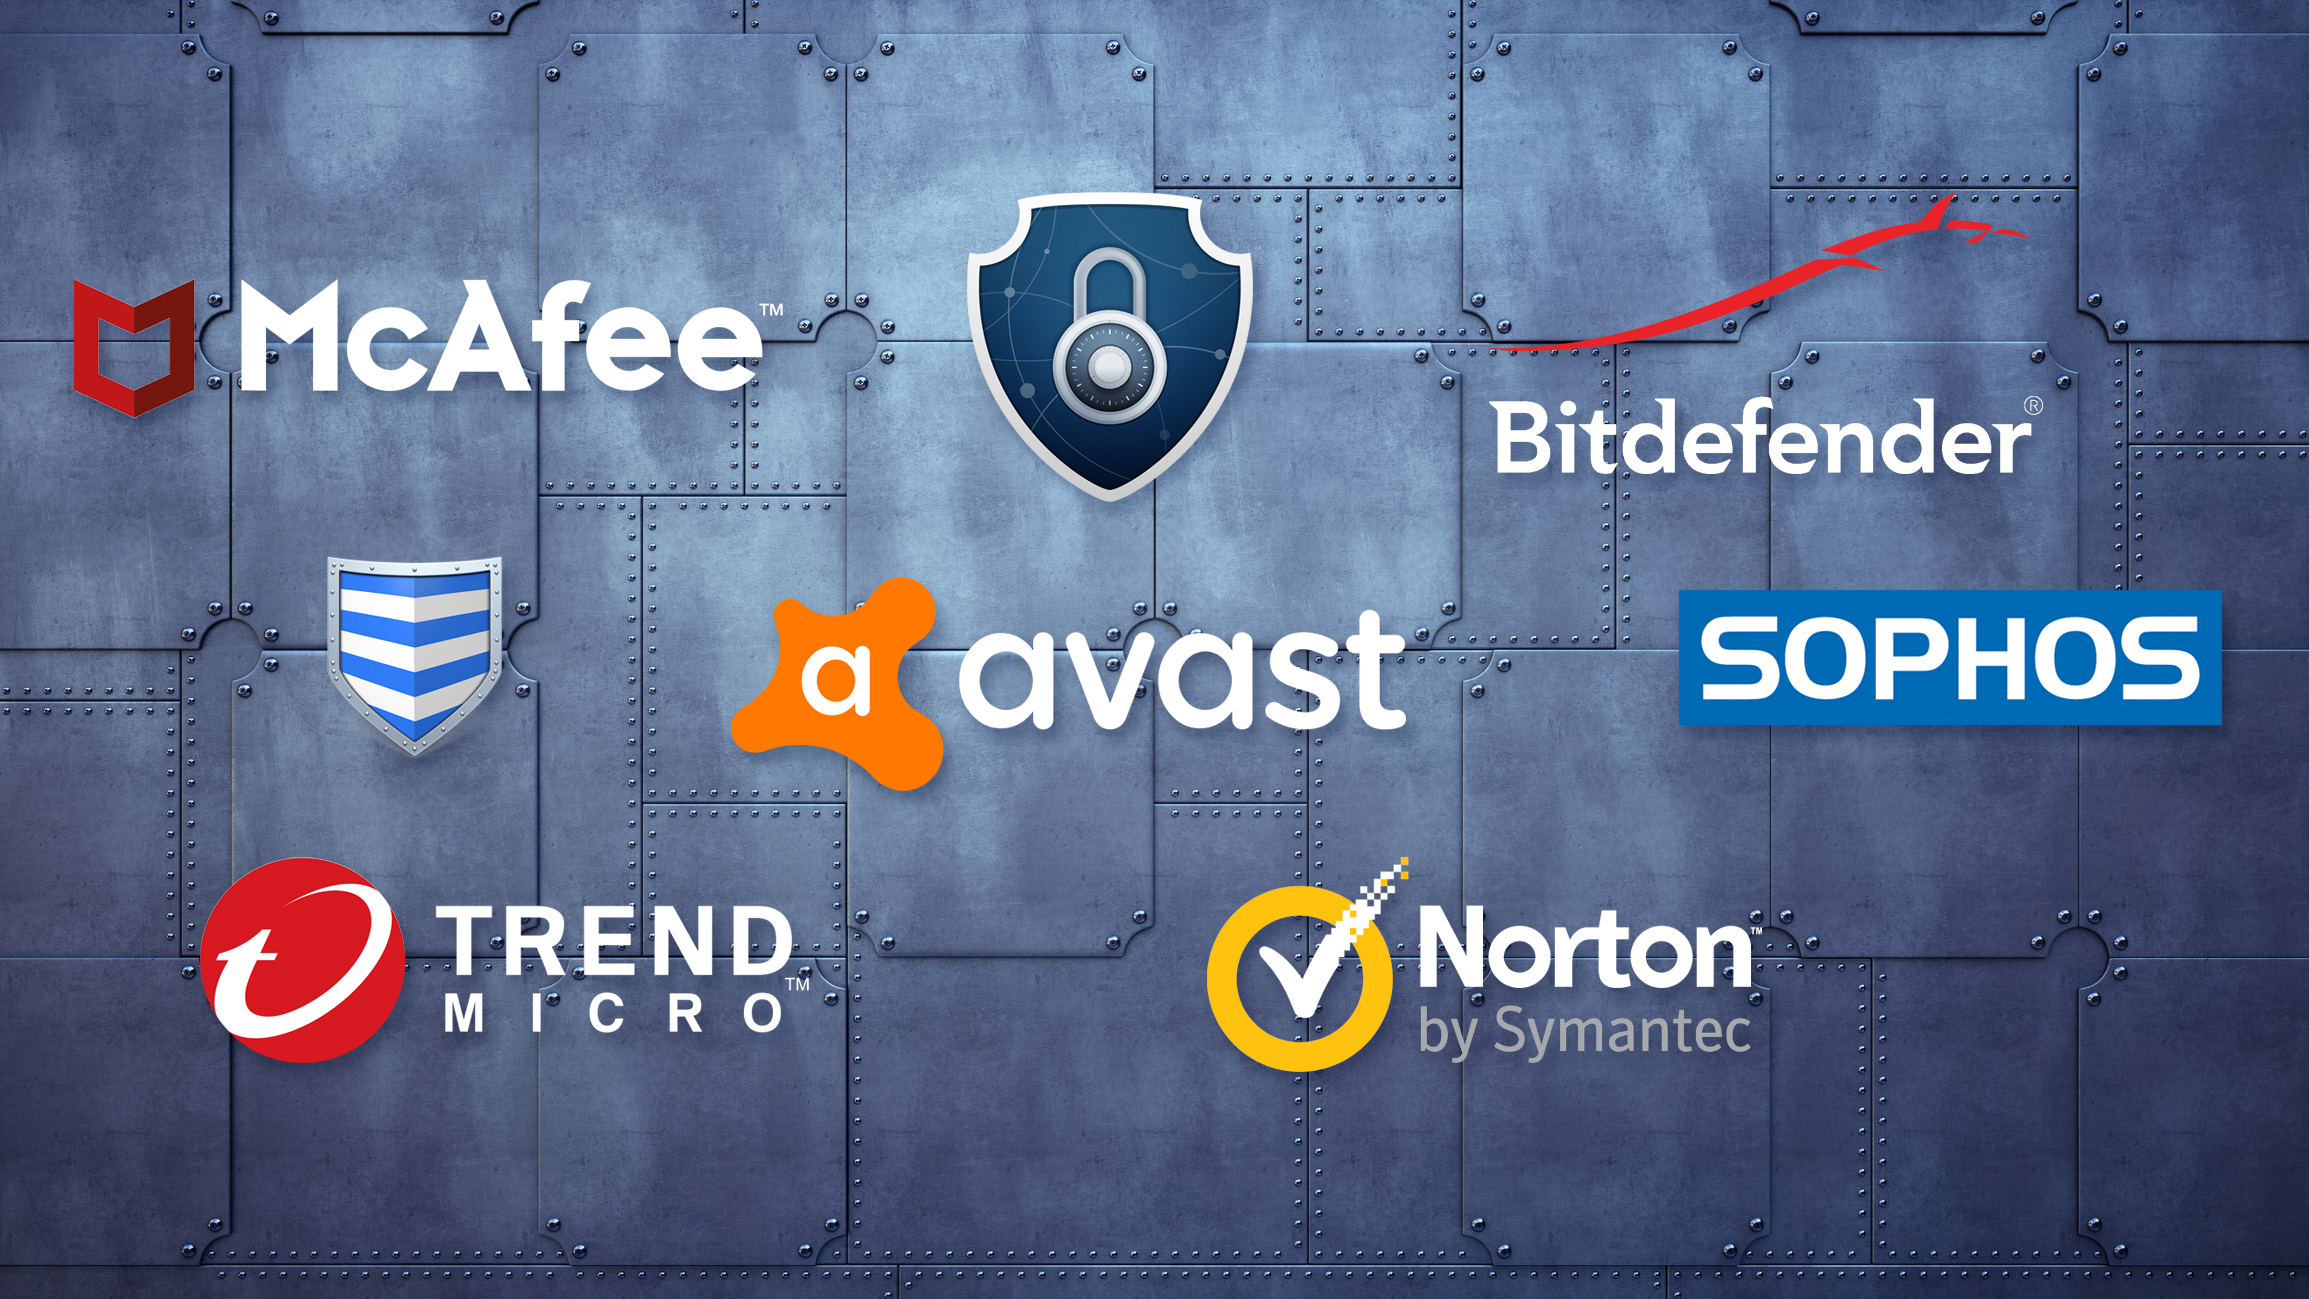 Do you need antivirus software for a macbook pro